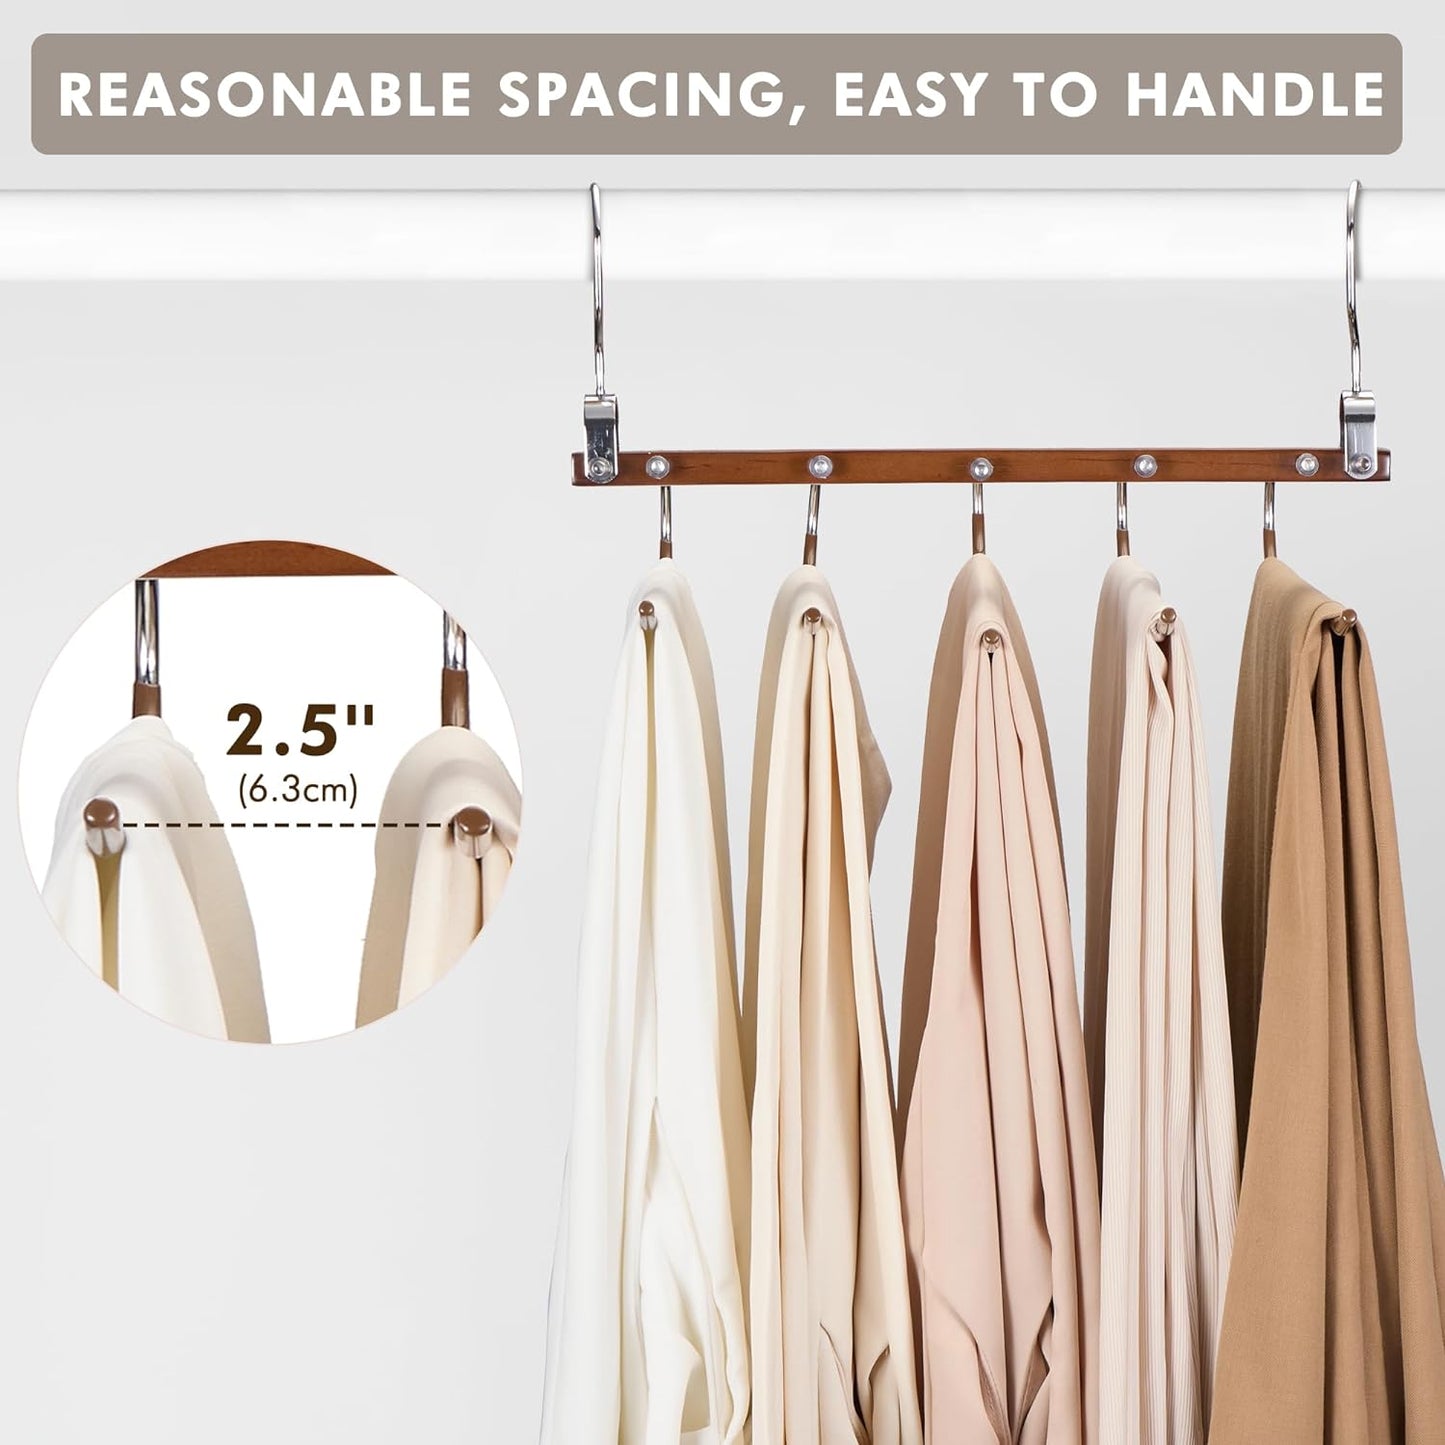 HOUSE DAY Pants Hangers Space Saving, Wood Jean Hangers for Closet 2 pack